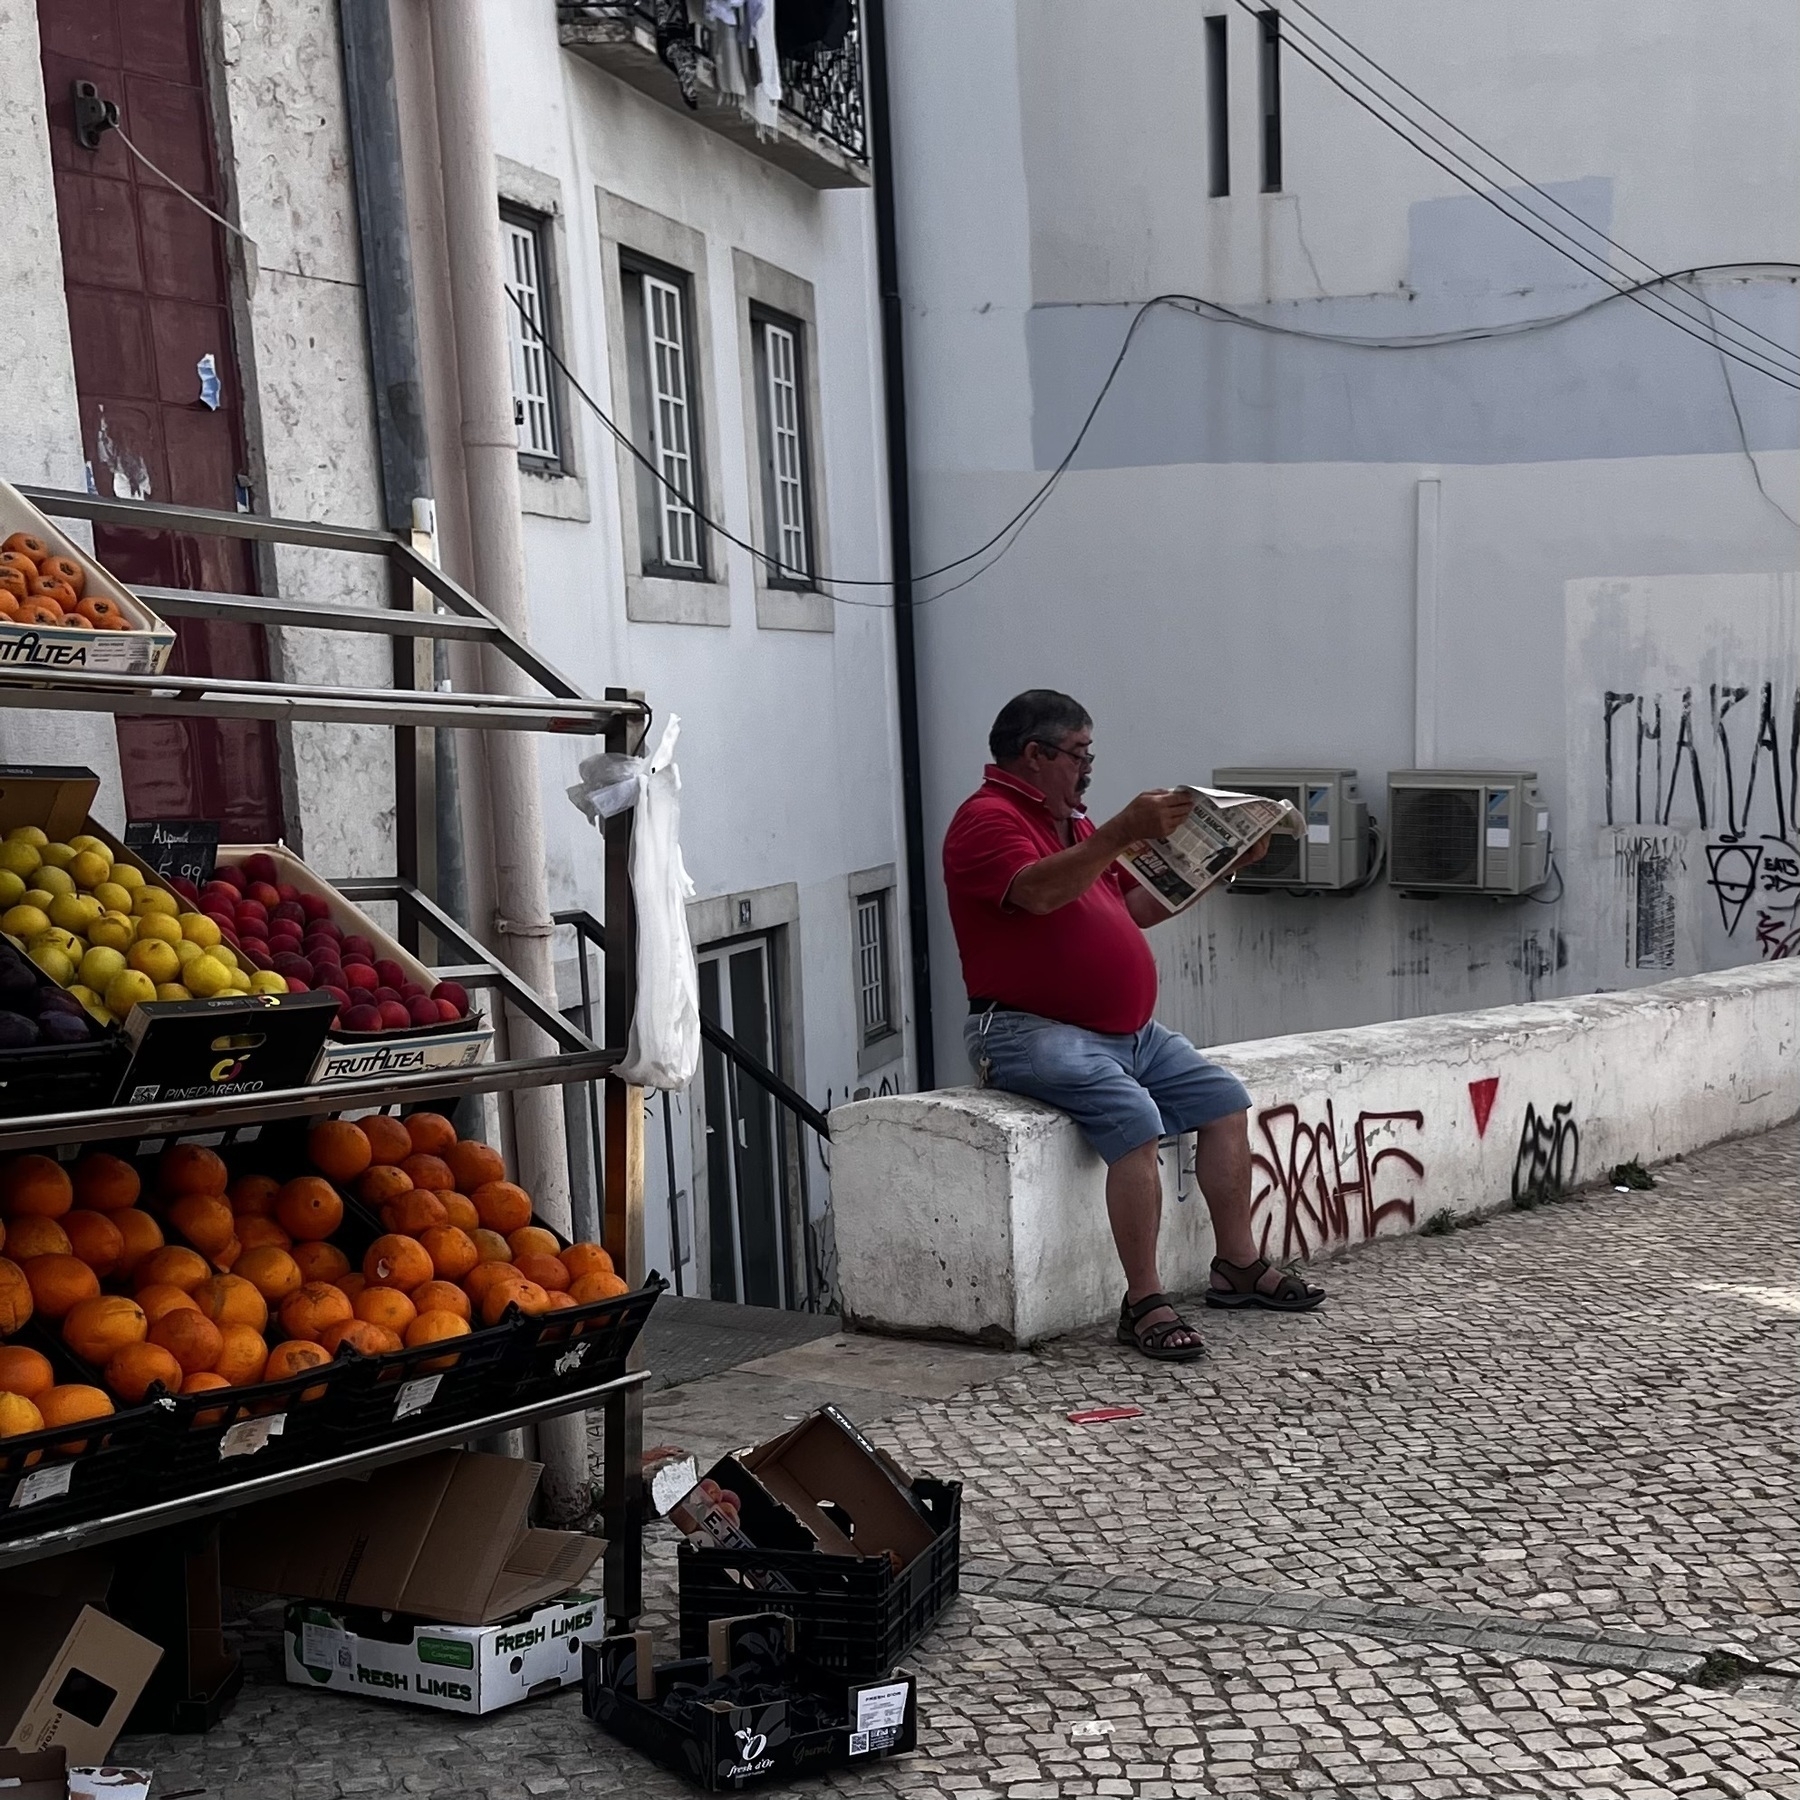 A man sits on a small wall reading his newspaper. He is wearing a red t-shirt which covers a bulging belly. He wears glasses,has a mustache, blue denim shorts and sandals. Beside him is a fruit stand.